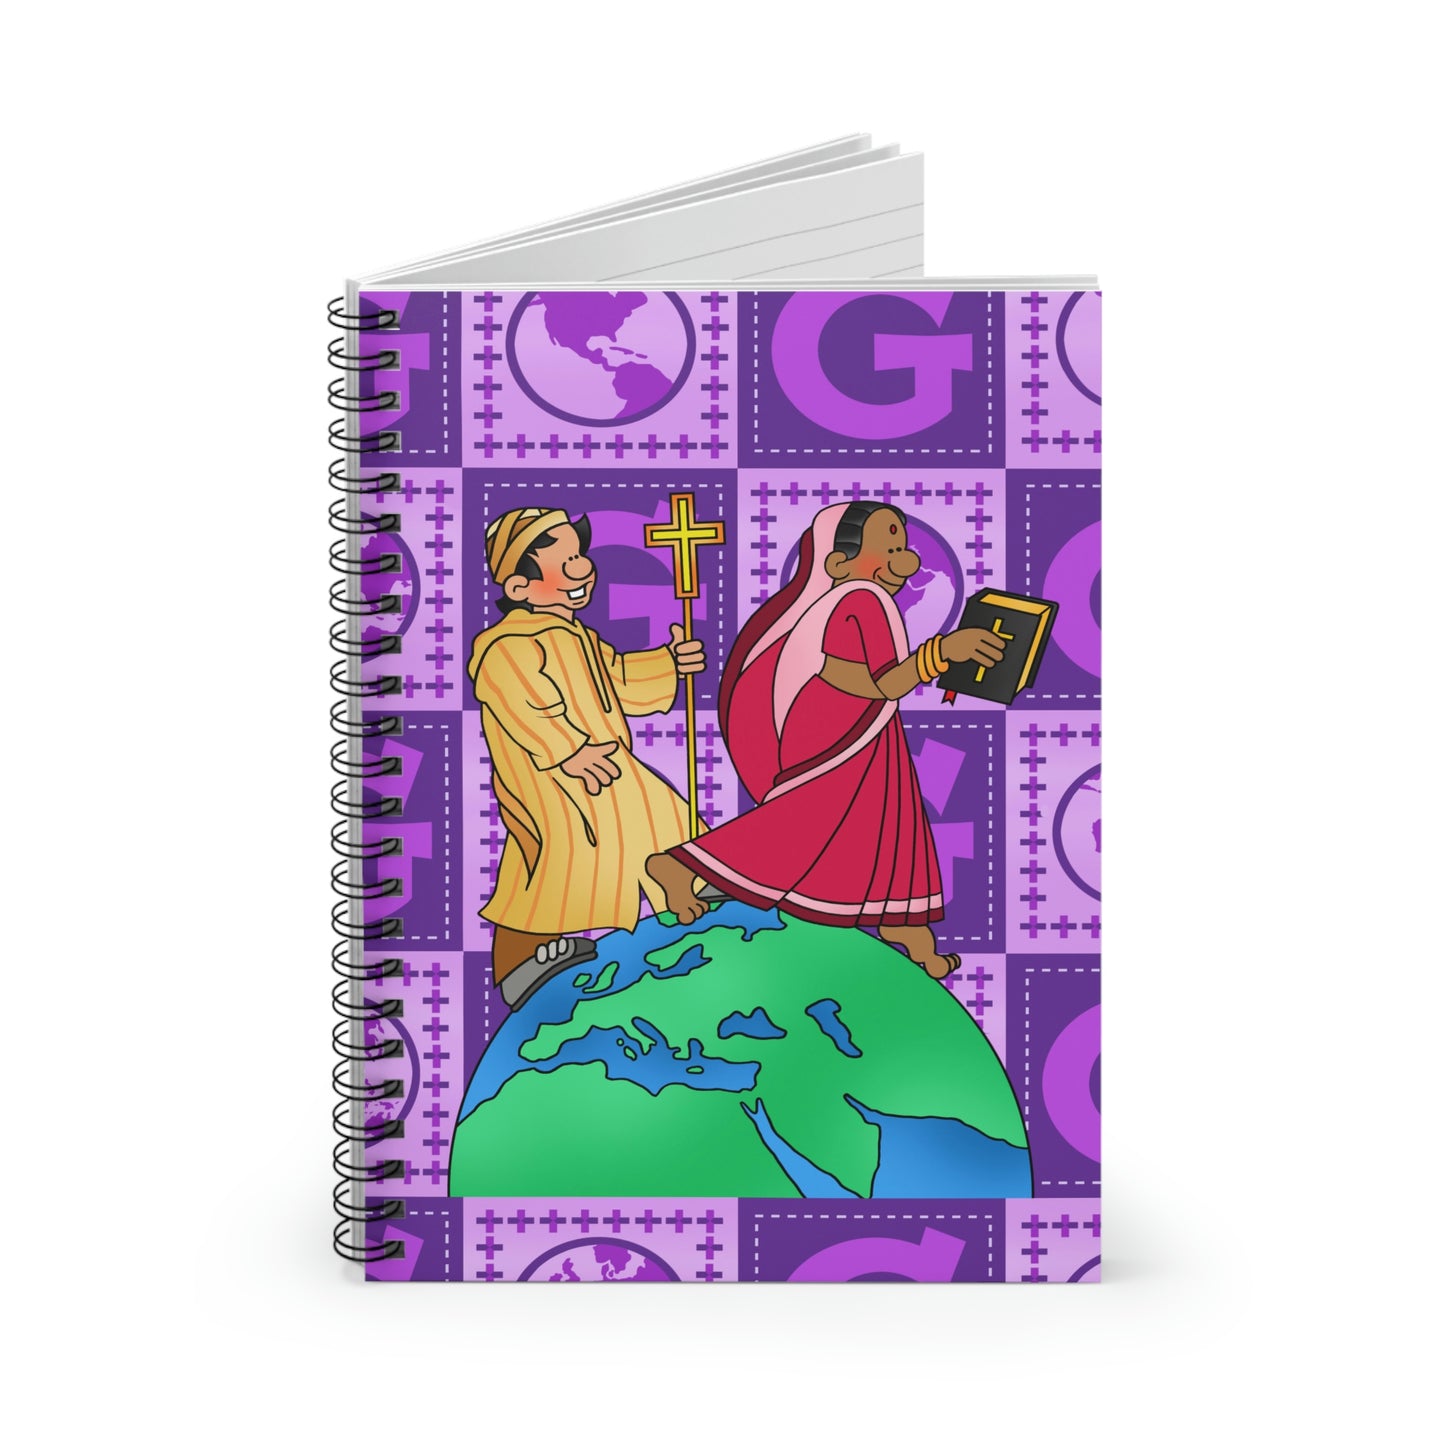 The Bible as Simple as ABC G Spiral Notebook - Ruled Line